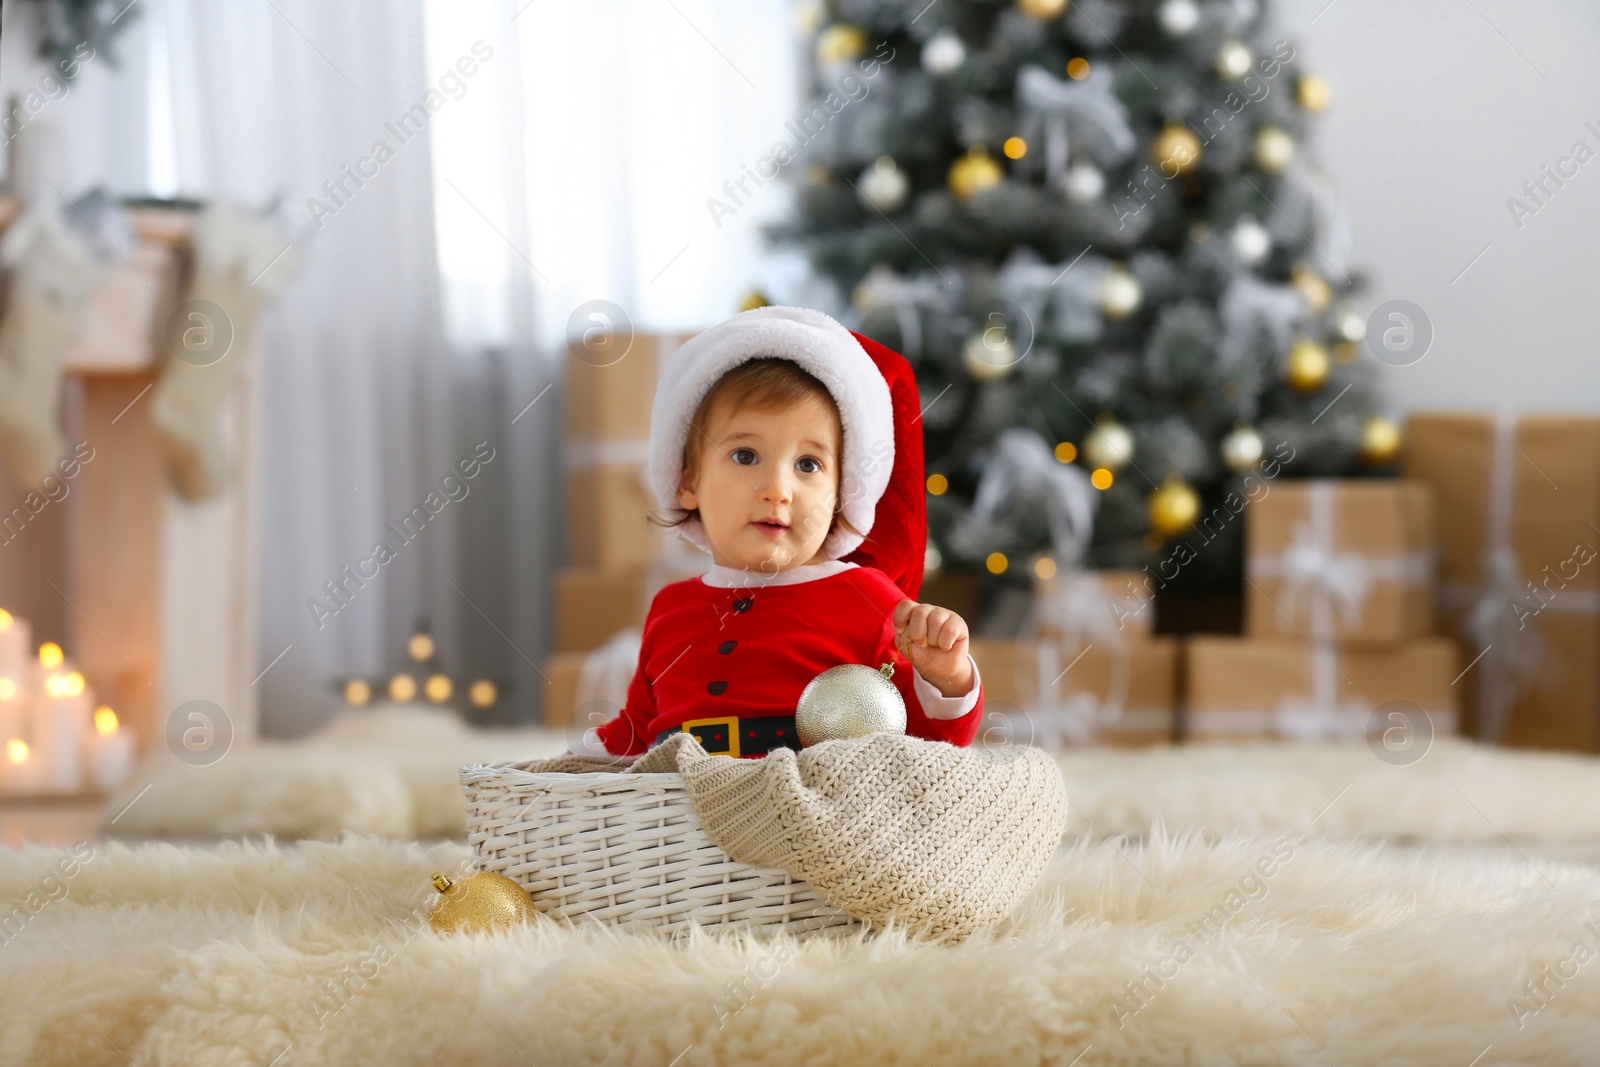 Image of Cute baby in Santa suit with Christmas ball at home